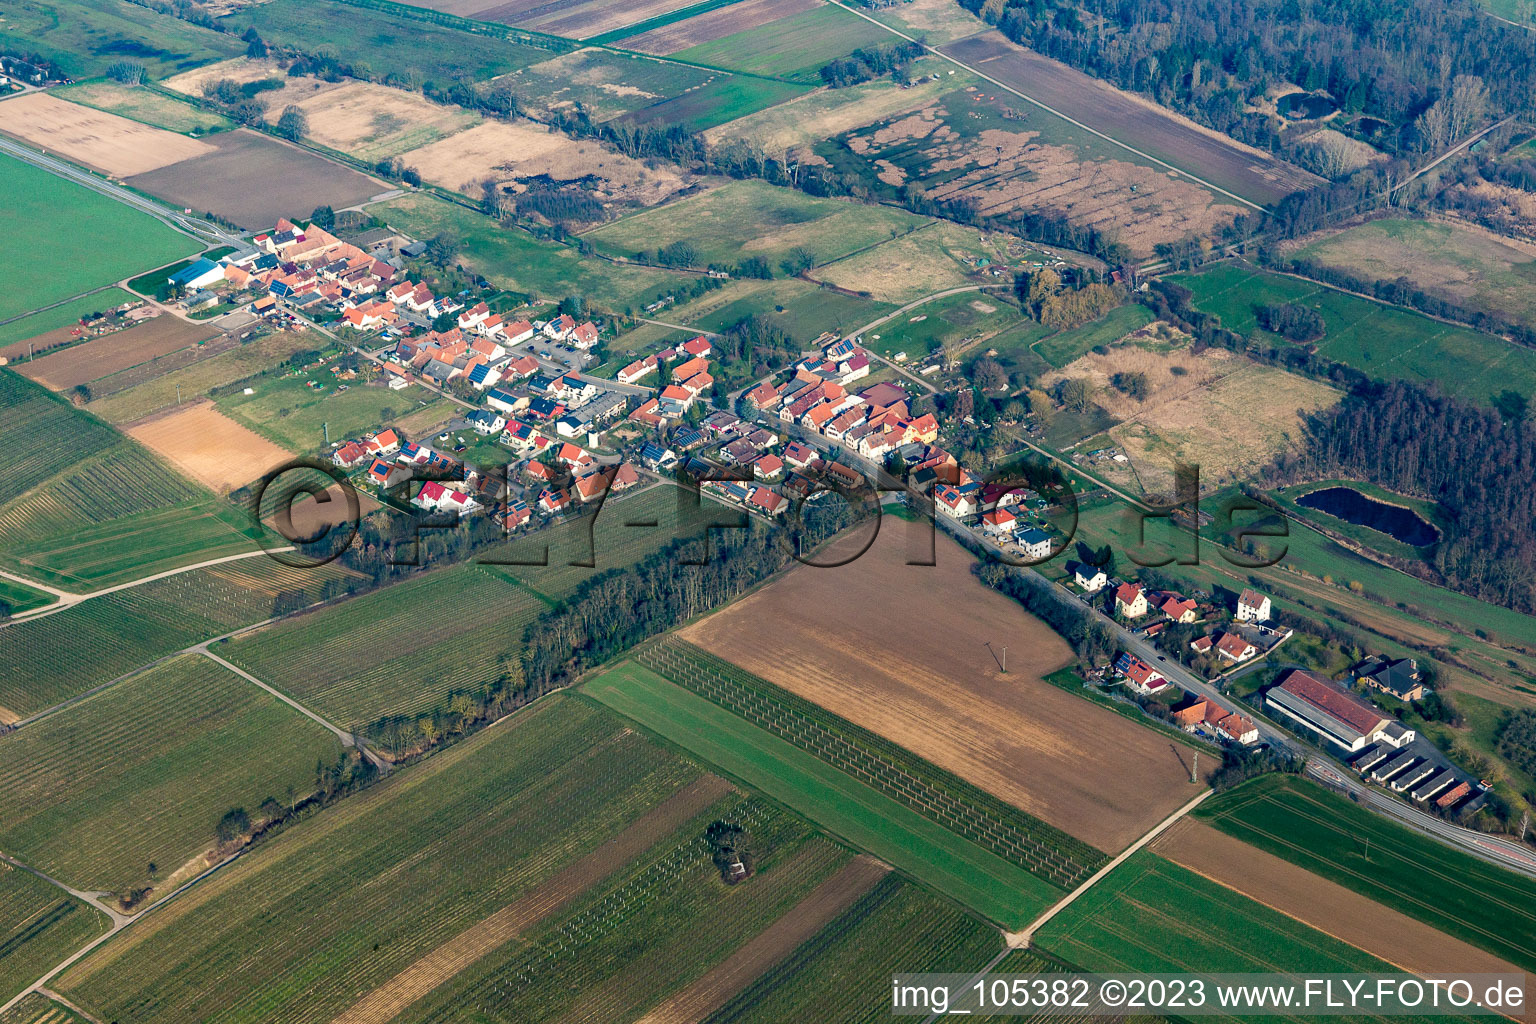 Hergersweiler in the state Rhineland-Palatinate, Germany seen from above